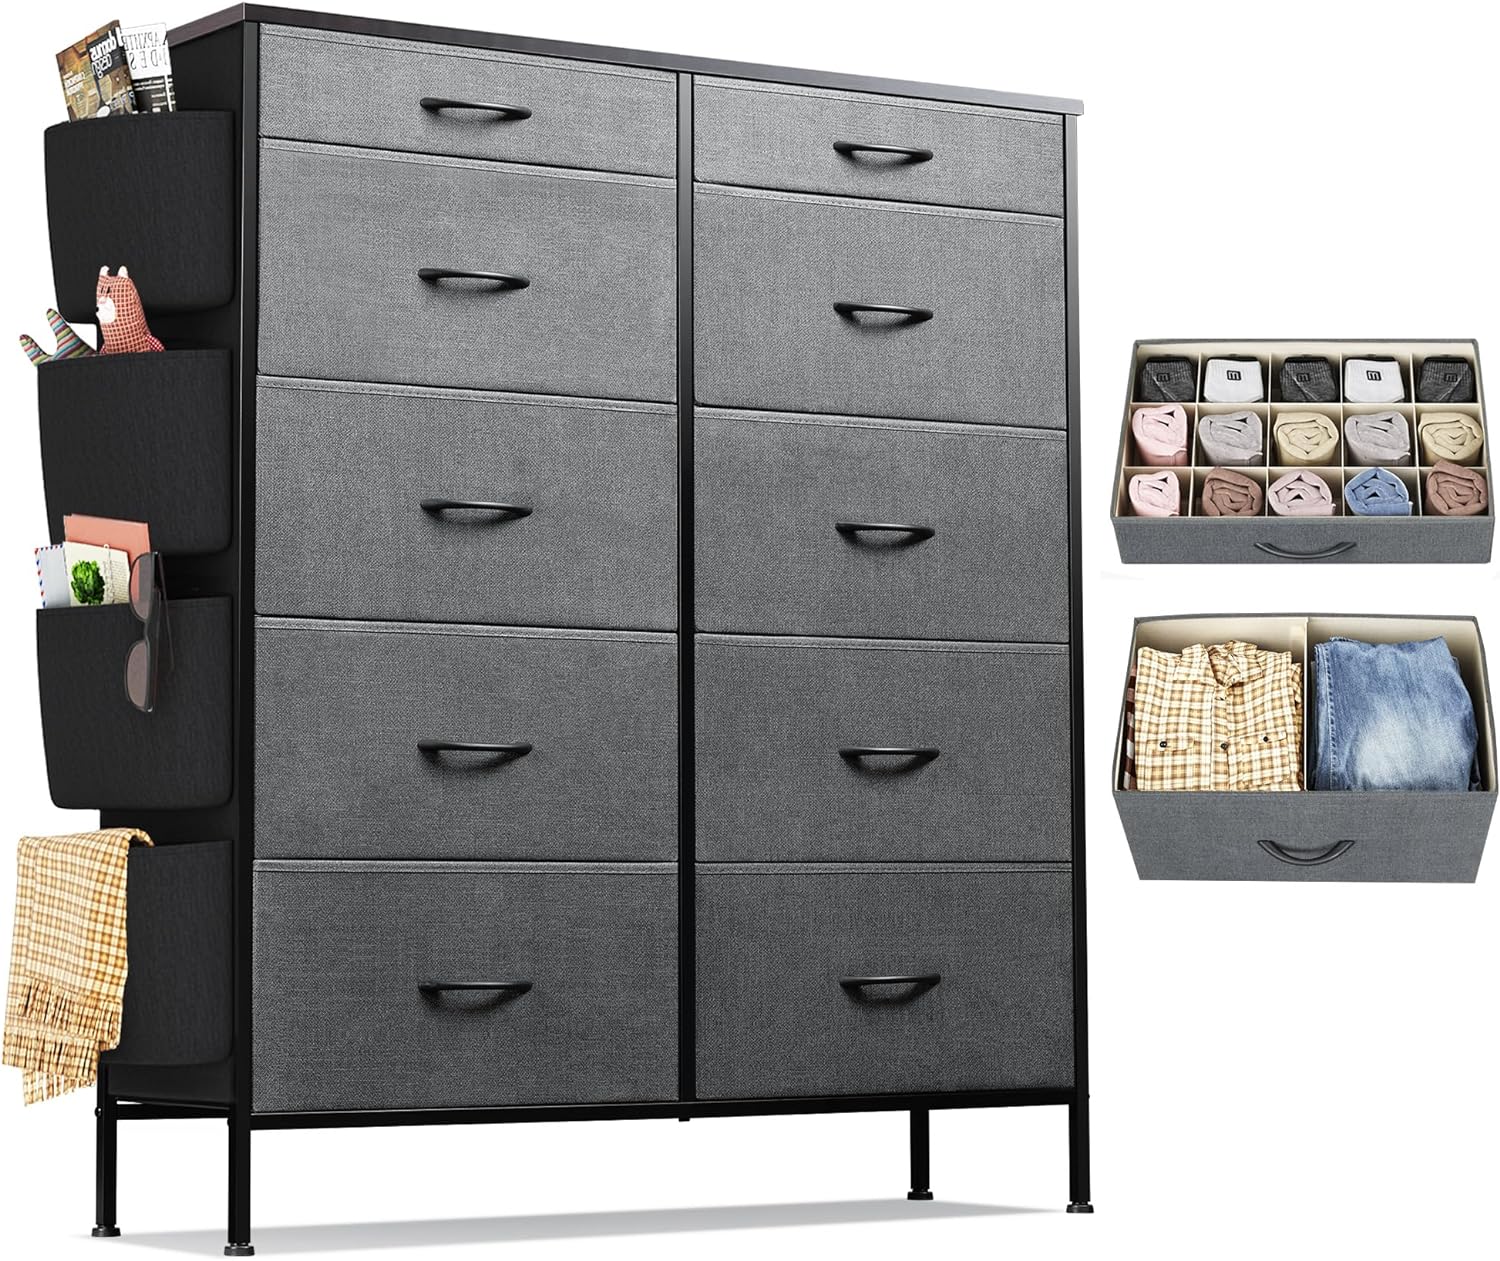 WLIVE Dresser for Bedroom with 10 Drawers, Tall Storage Tower with Drawer Organizers, Side Pockets and Hooks, Fabric Dresser, Chest of Drawers for Living Room, Closet, Hallway, Dark Grey